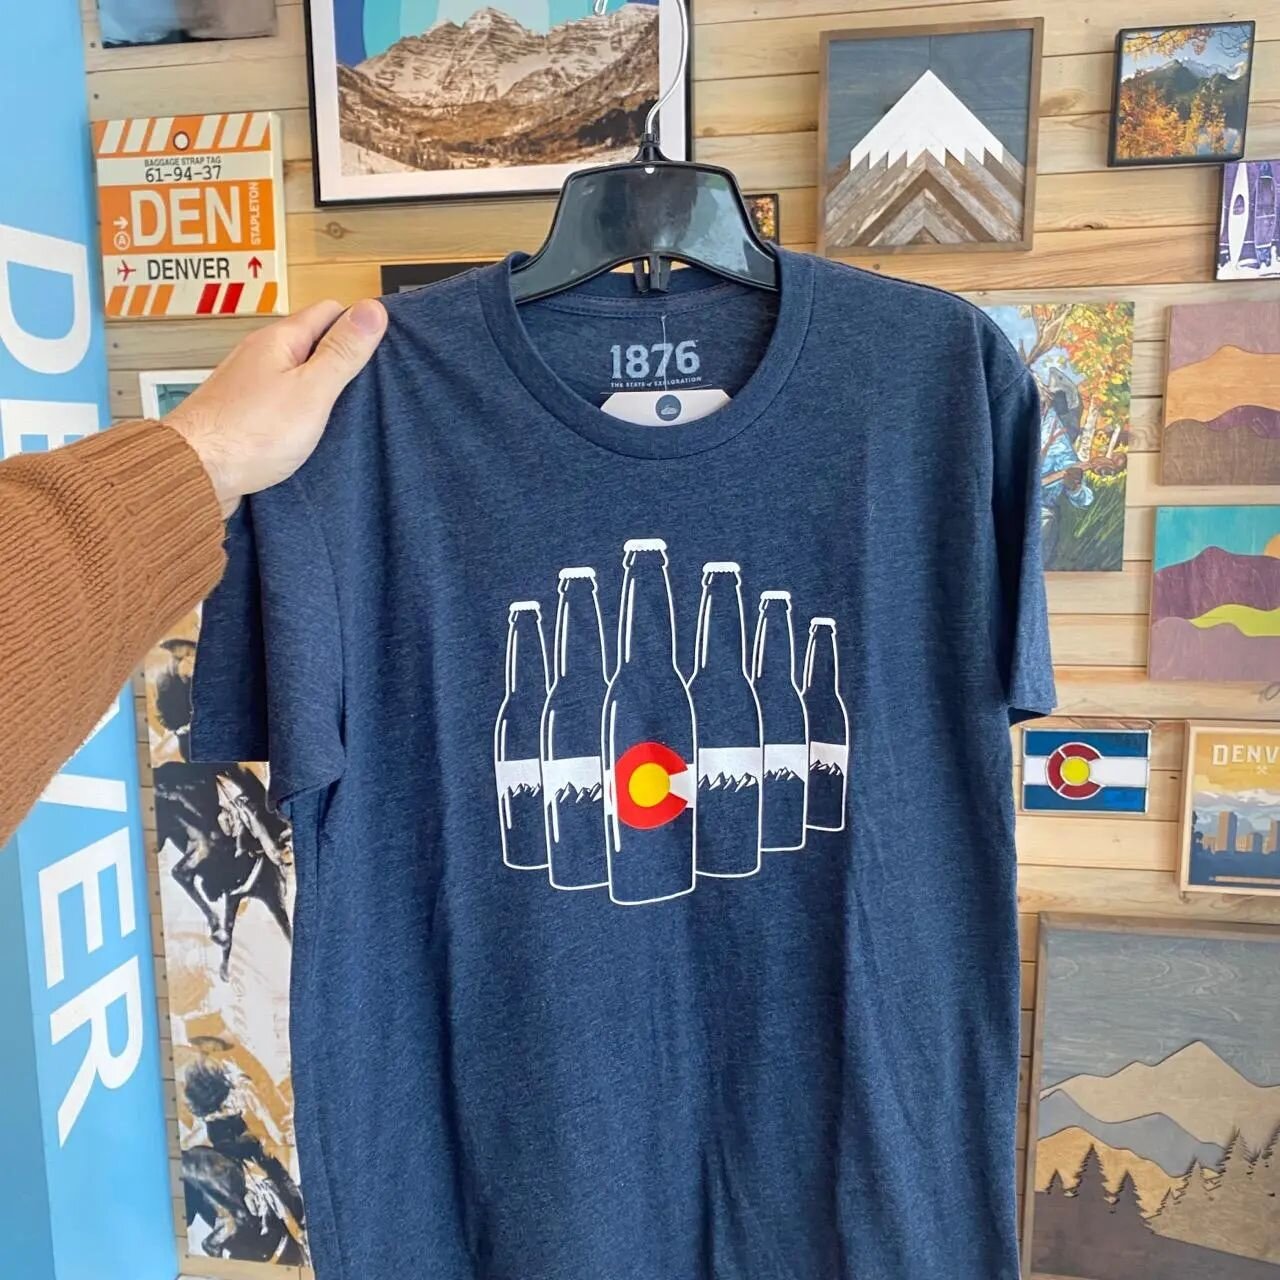 A best selling t-shirt at I Heart Denver Store. 6 pack Colorado by @1876official 

#iheartdenverstore #tshirts #downtowndenver #sixpack #beer #colorado #16thstreetmall #denverstore #giftideas